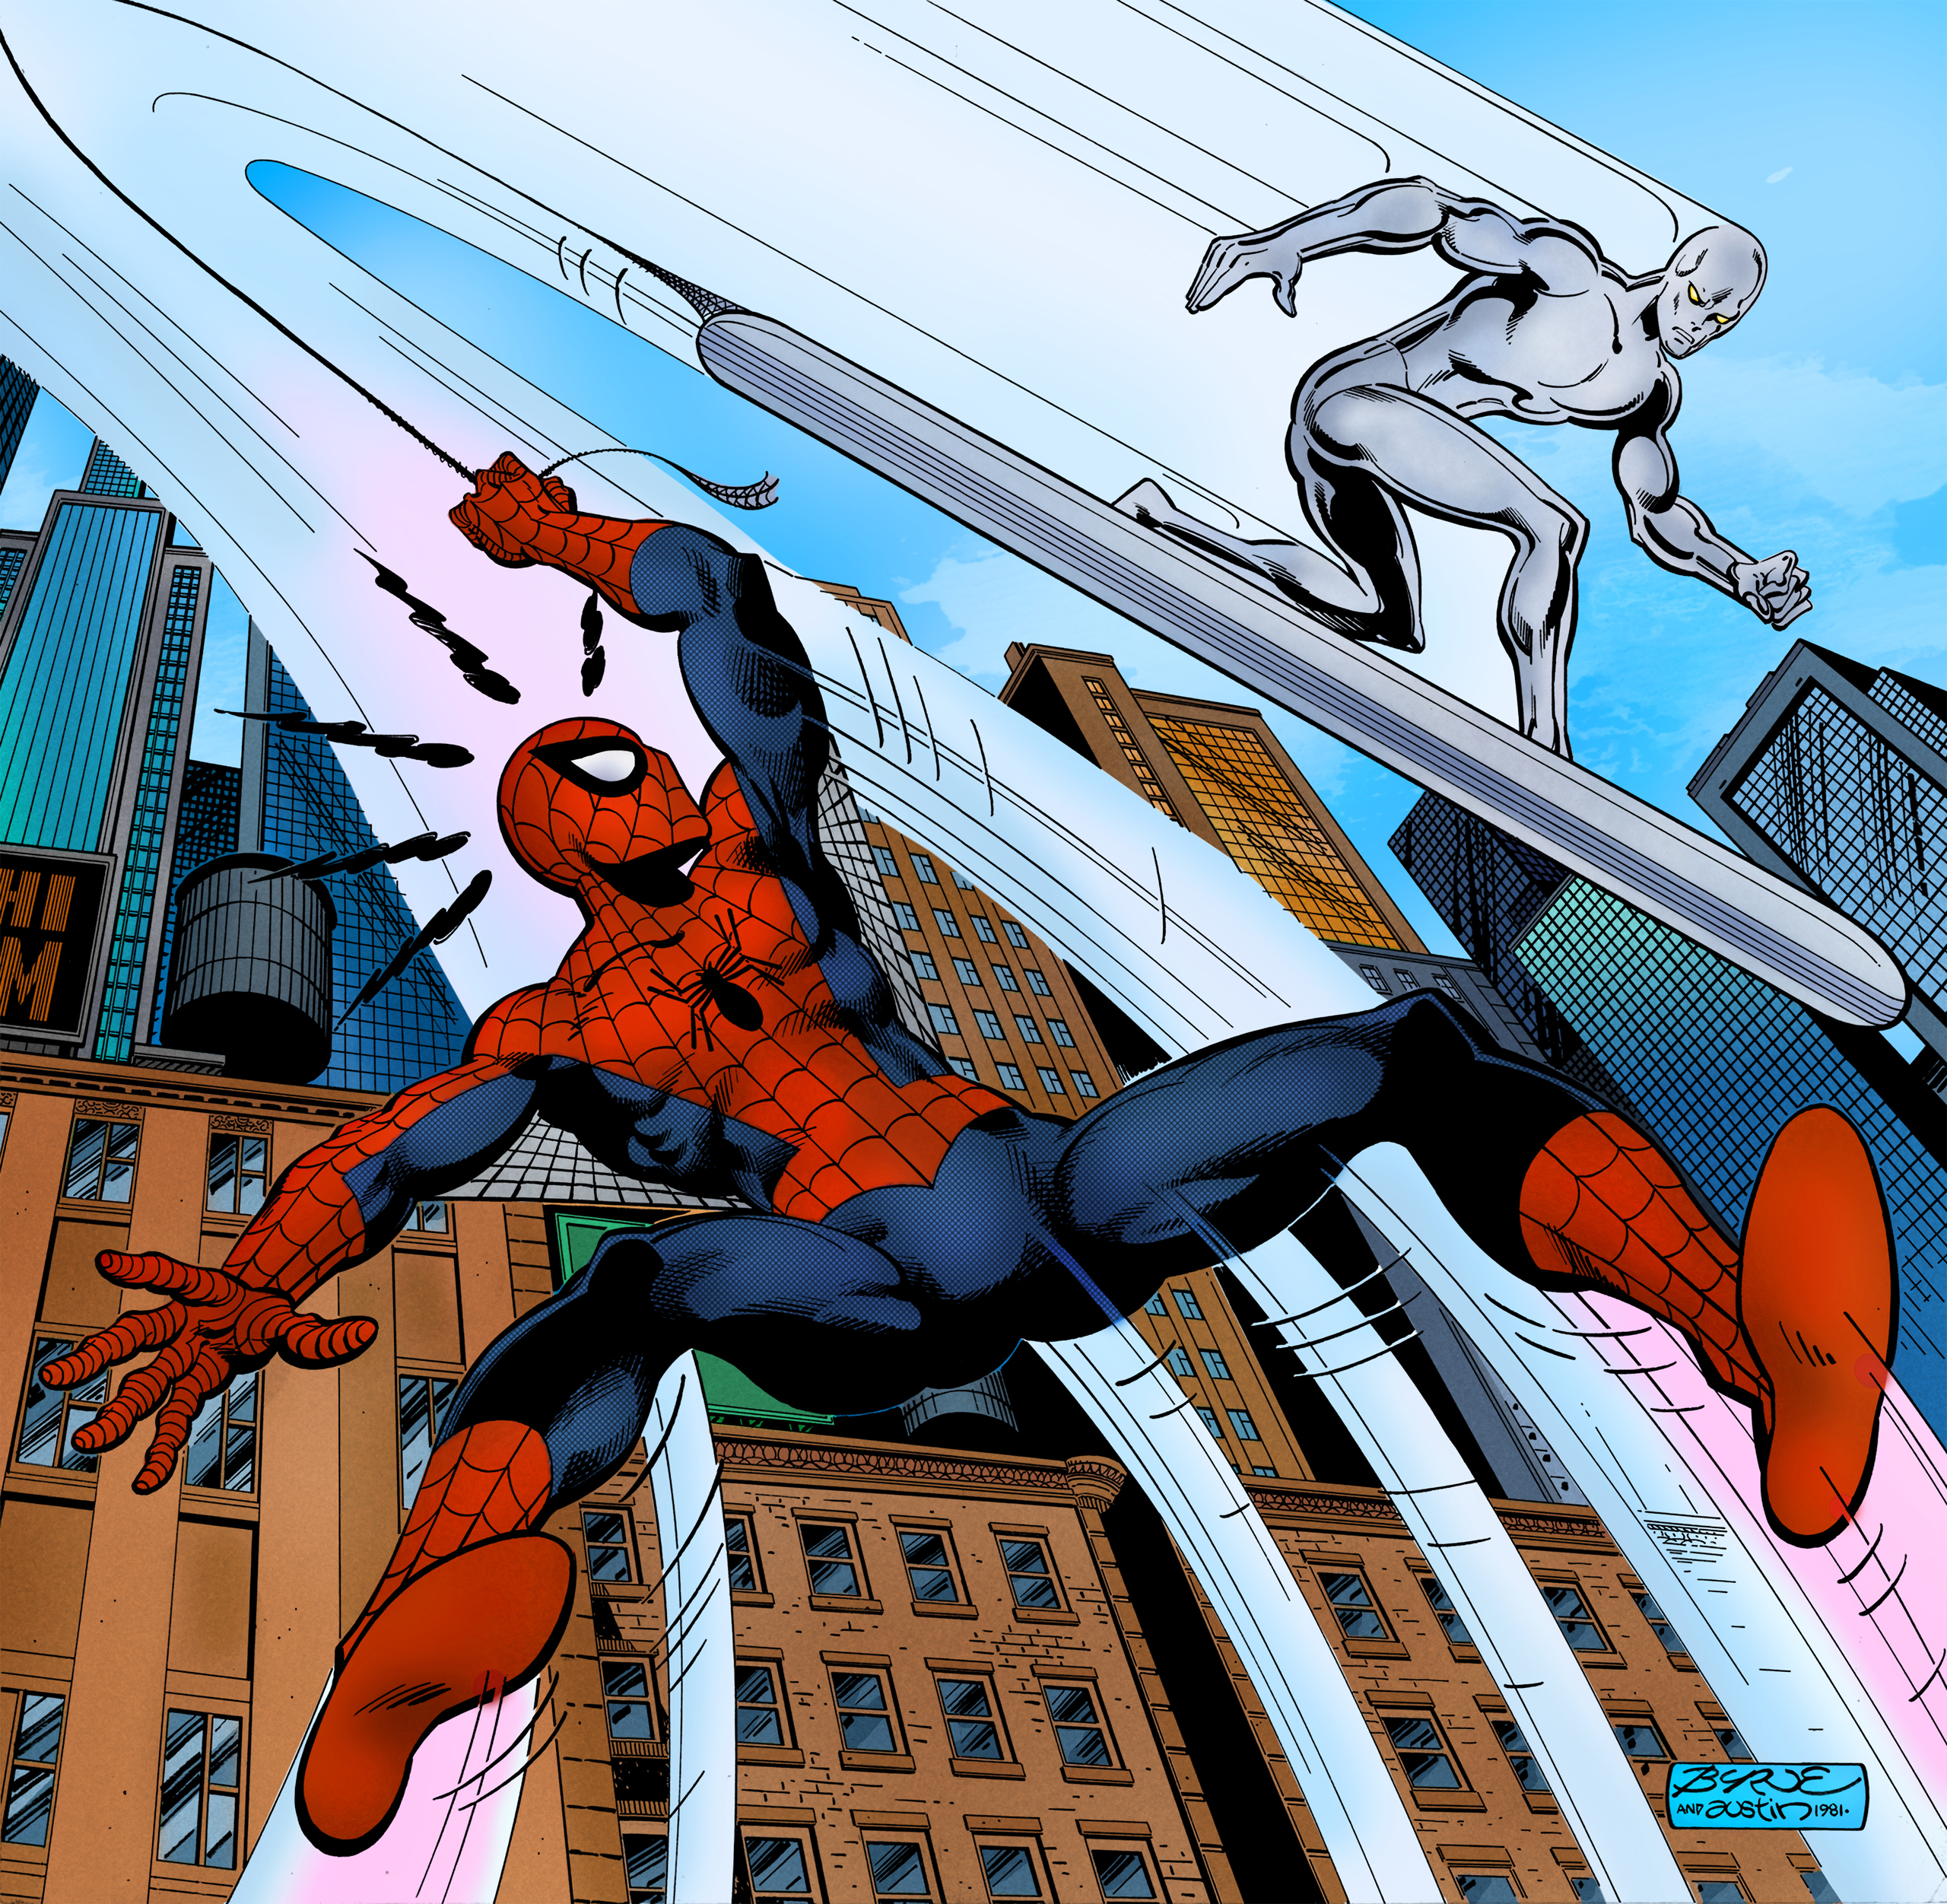 Spider-Man And The Silver Surfer (John Byrne) by xts33 on DeviantArt